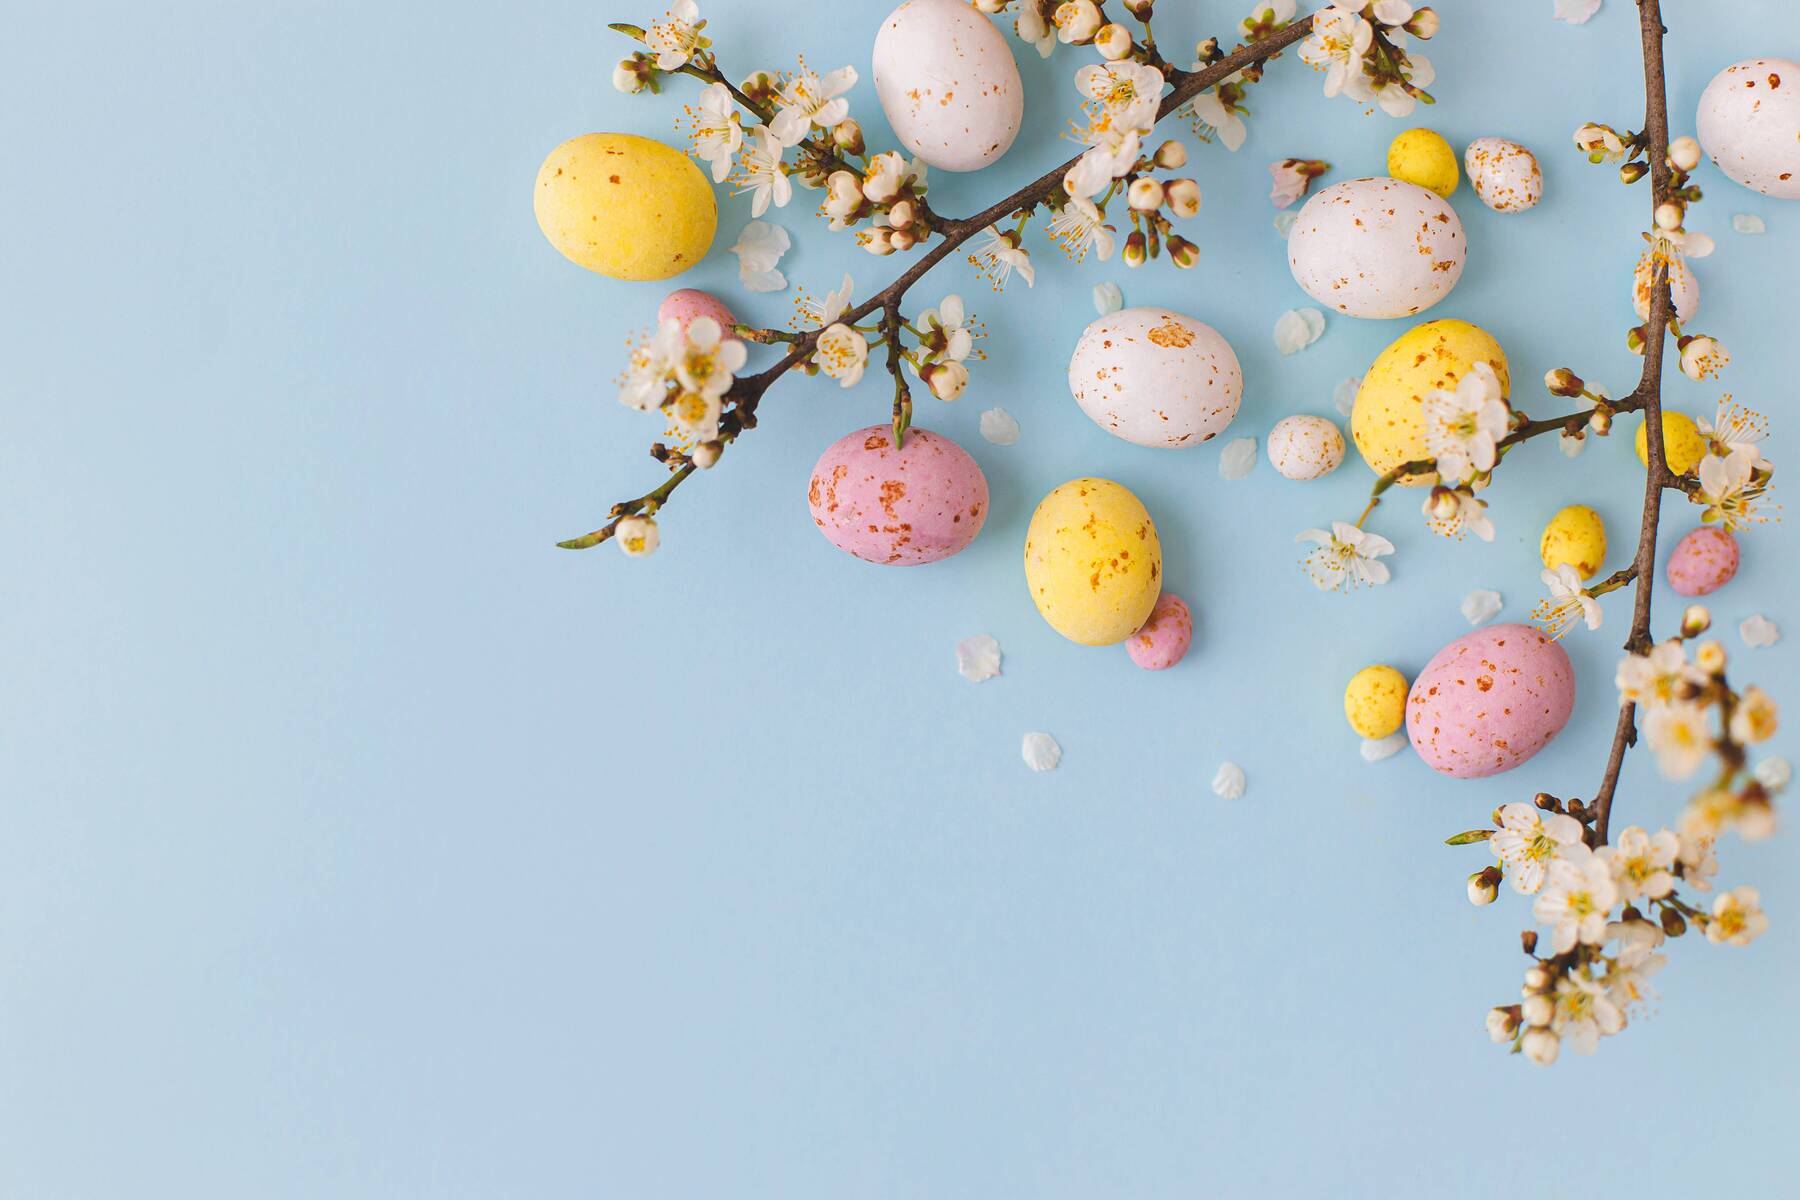 Easter Traditions to Travel For This Spring